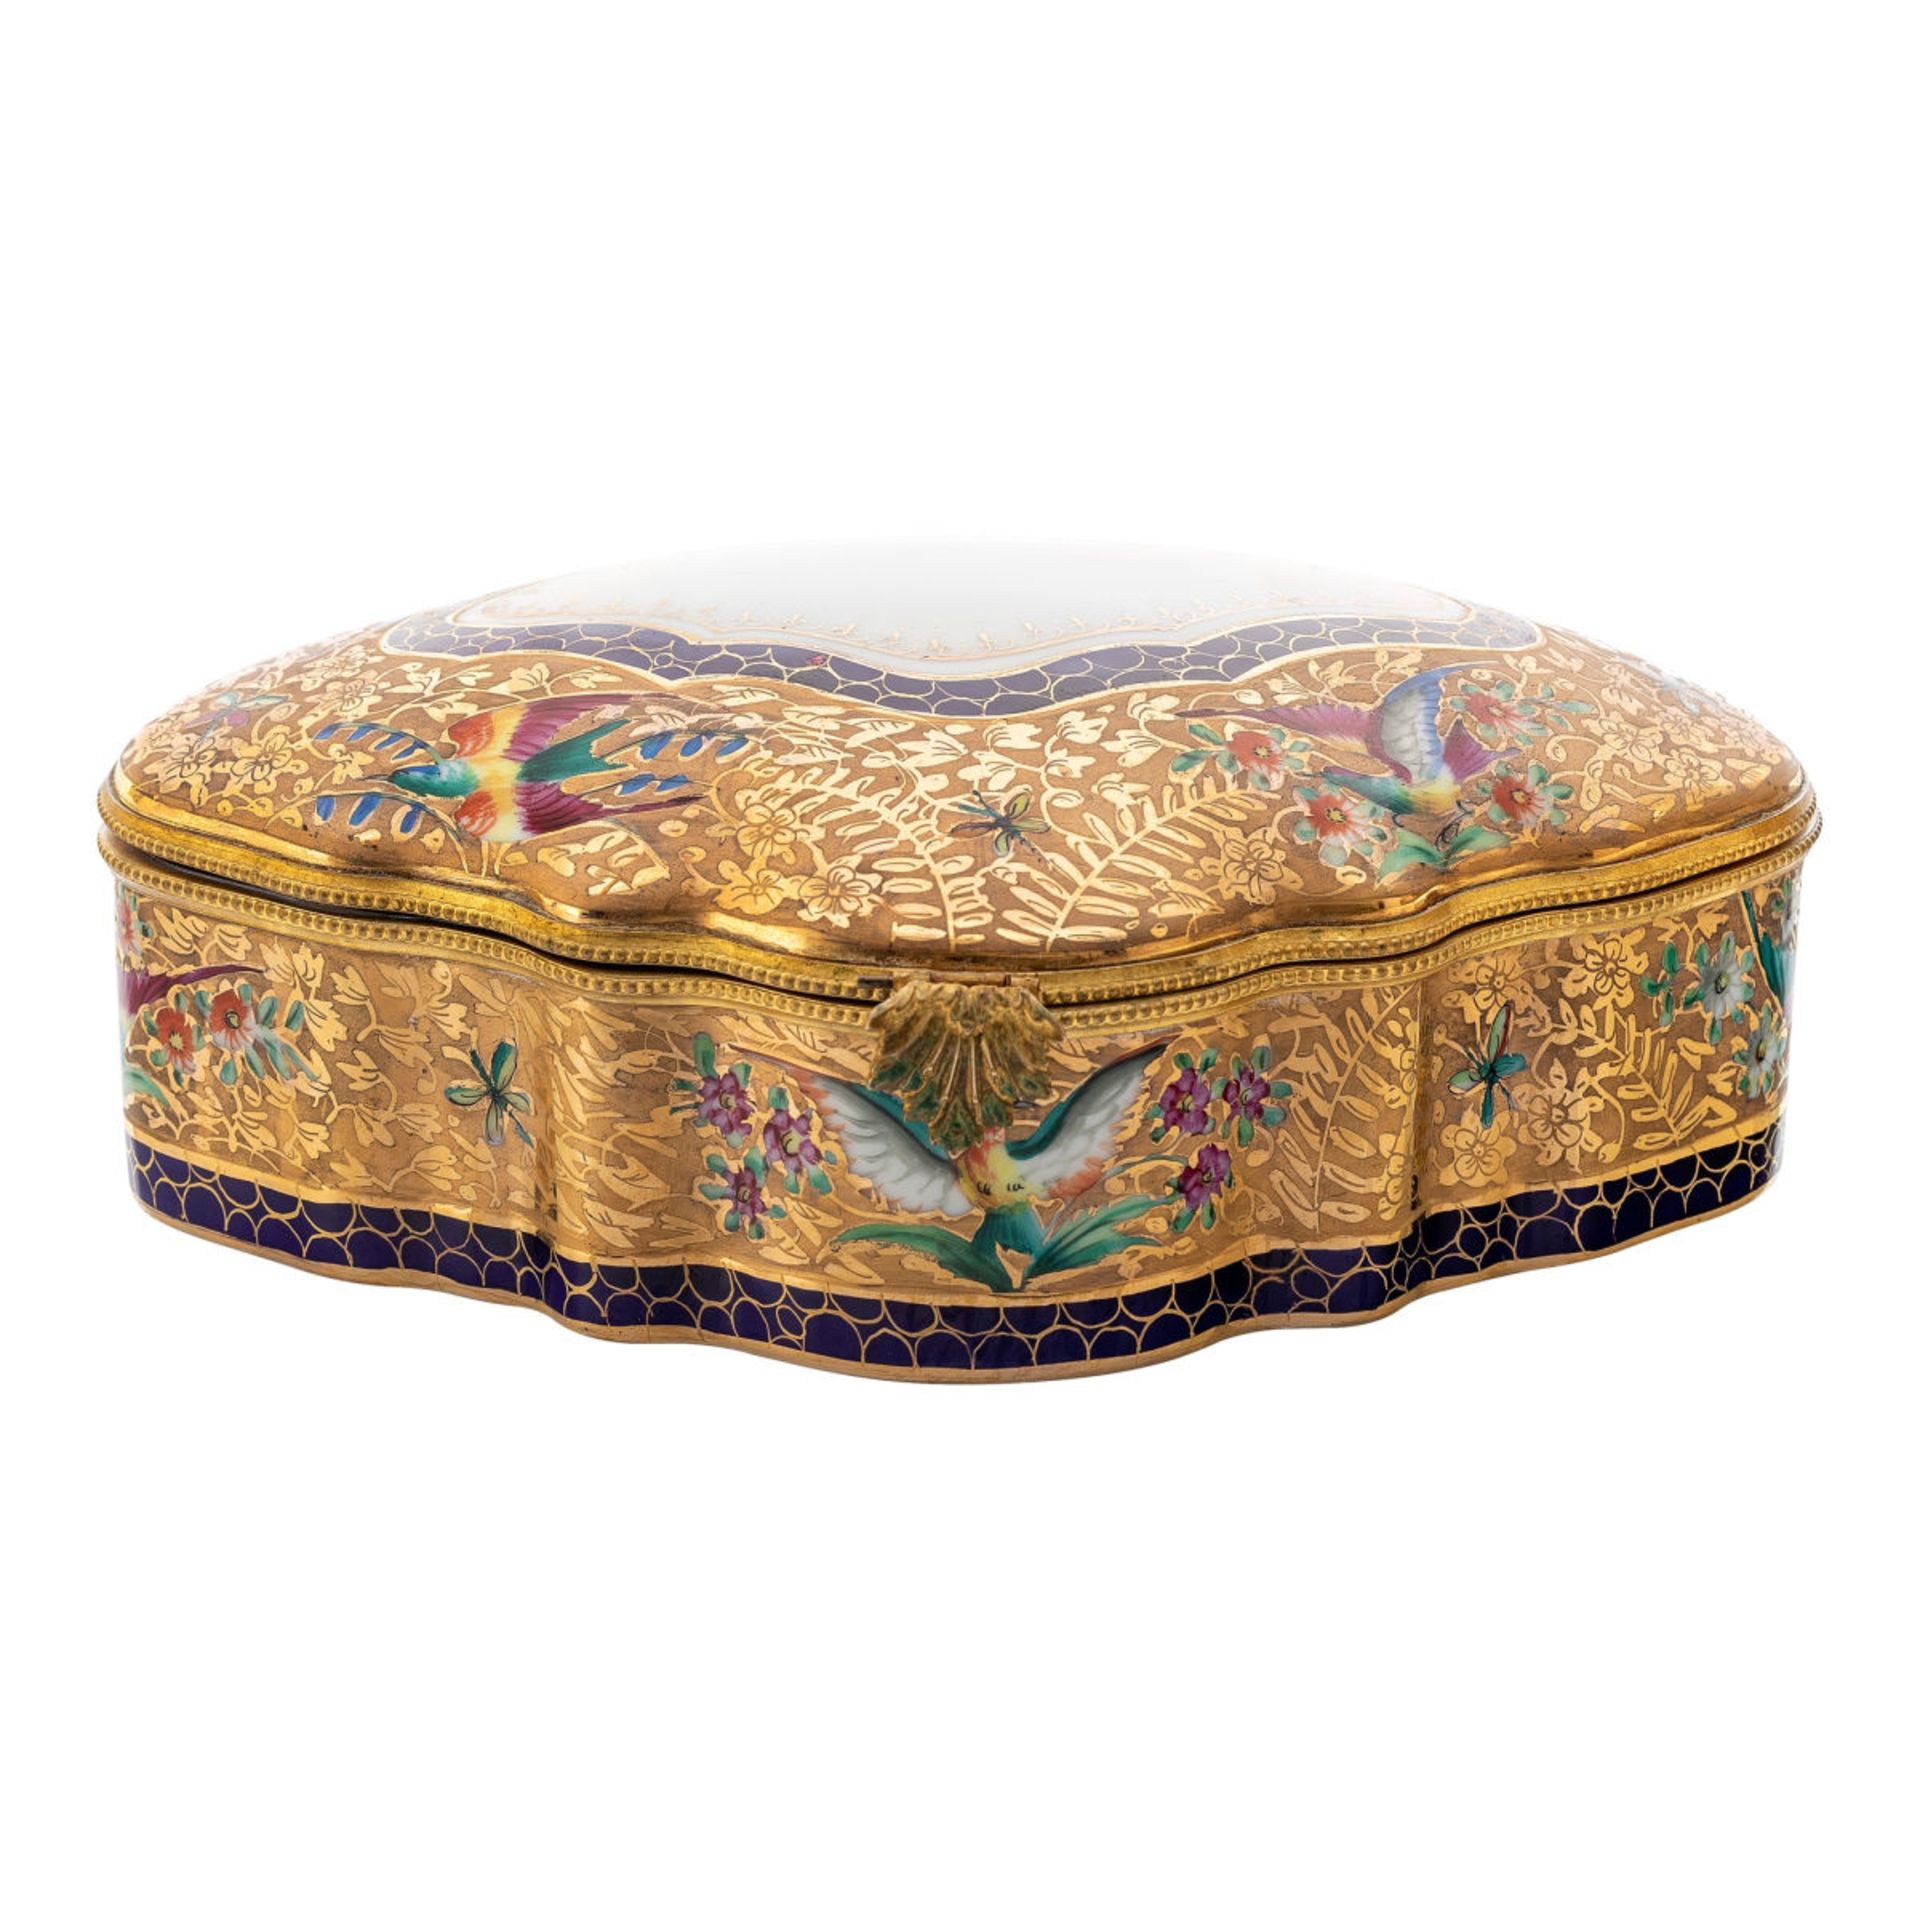 Lidded box with birds of paradise - Image 2 of 3